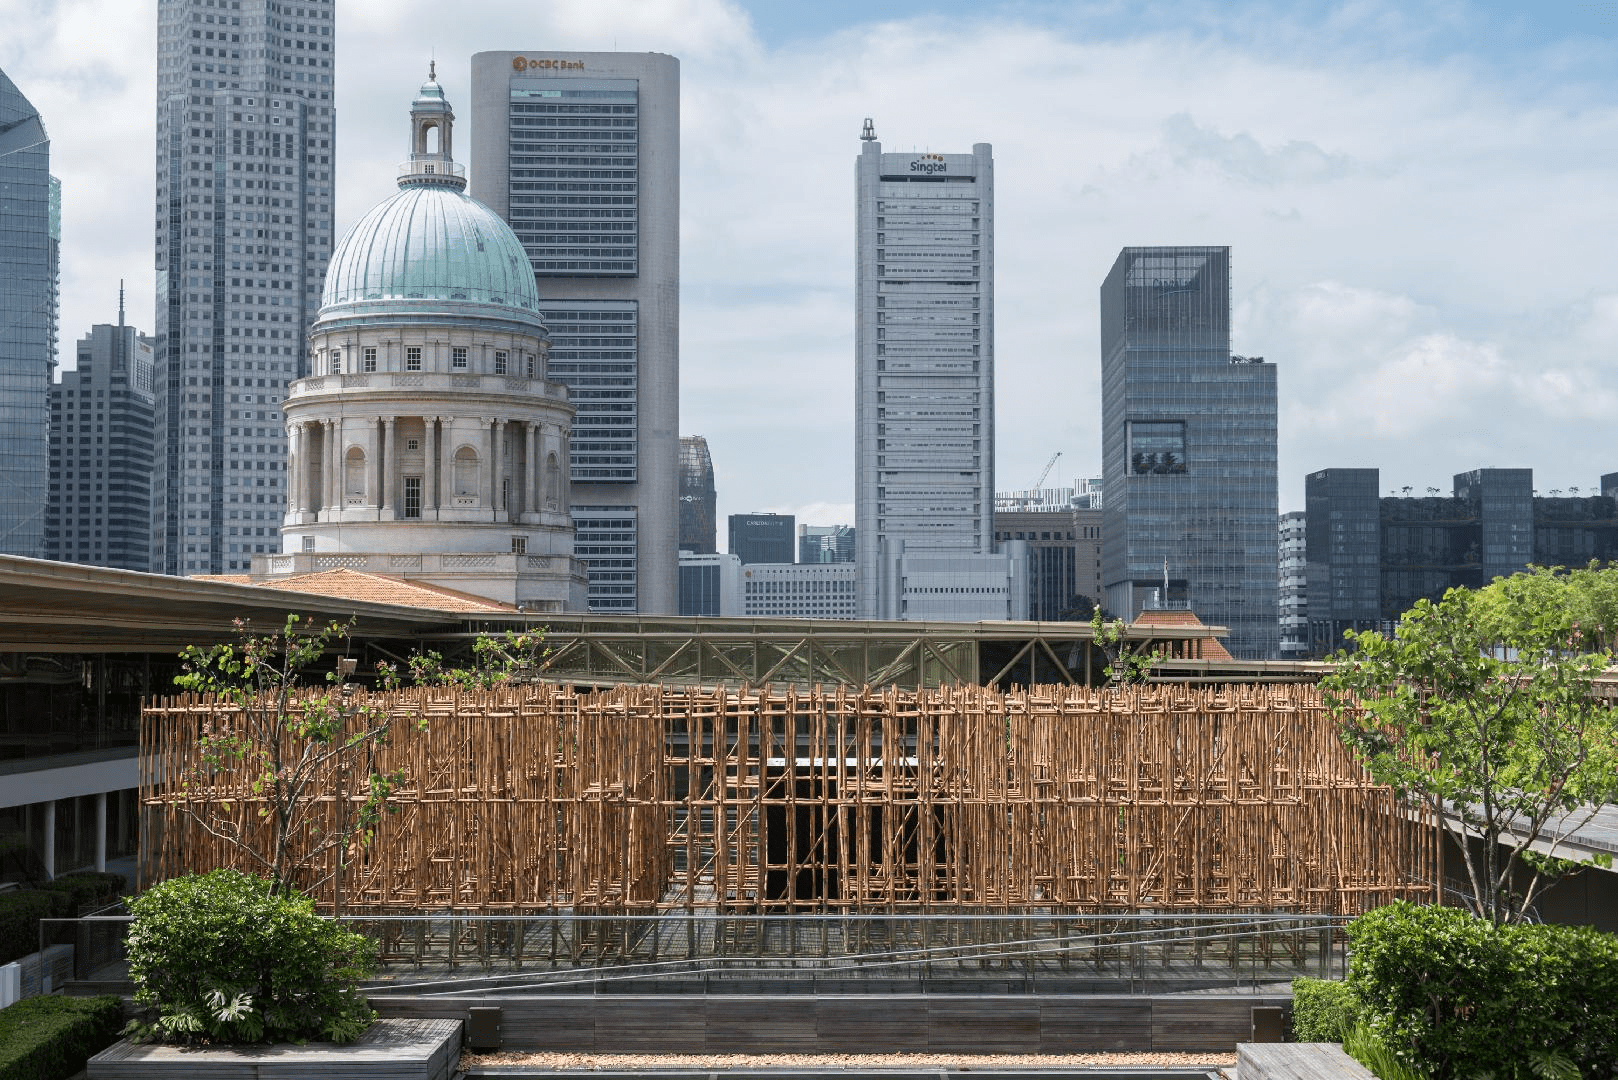 National Gallery roof garden singapore